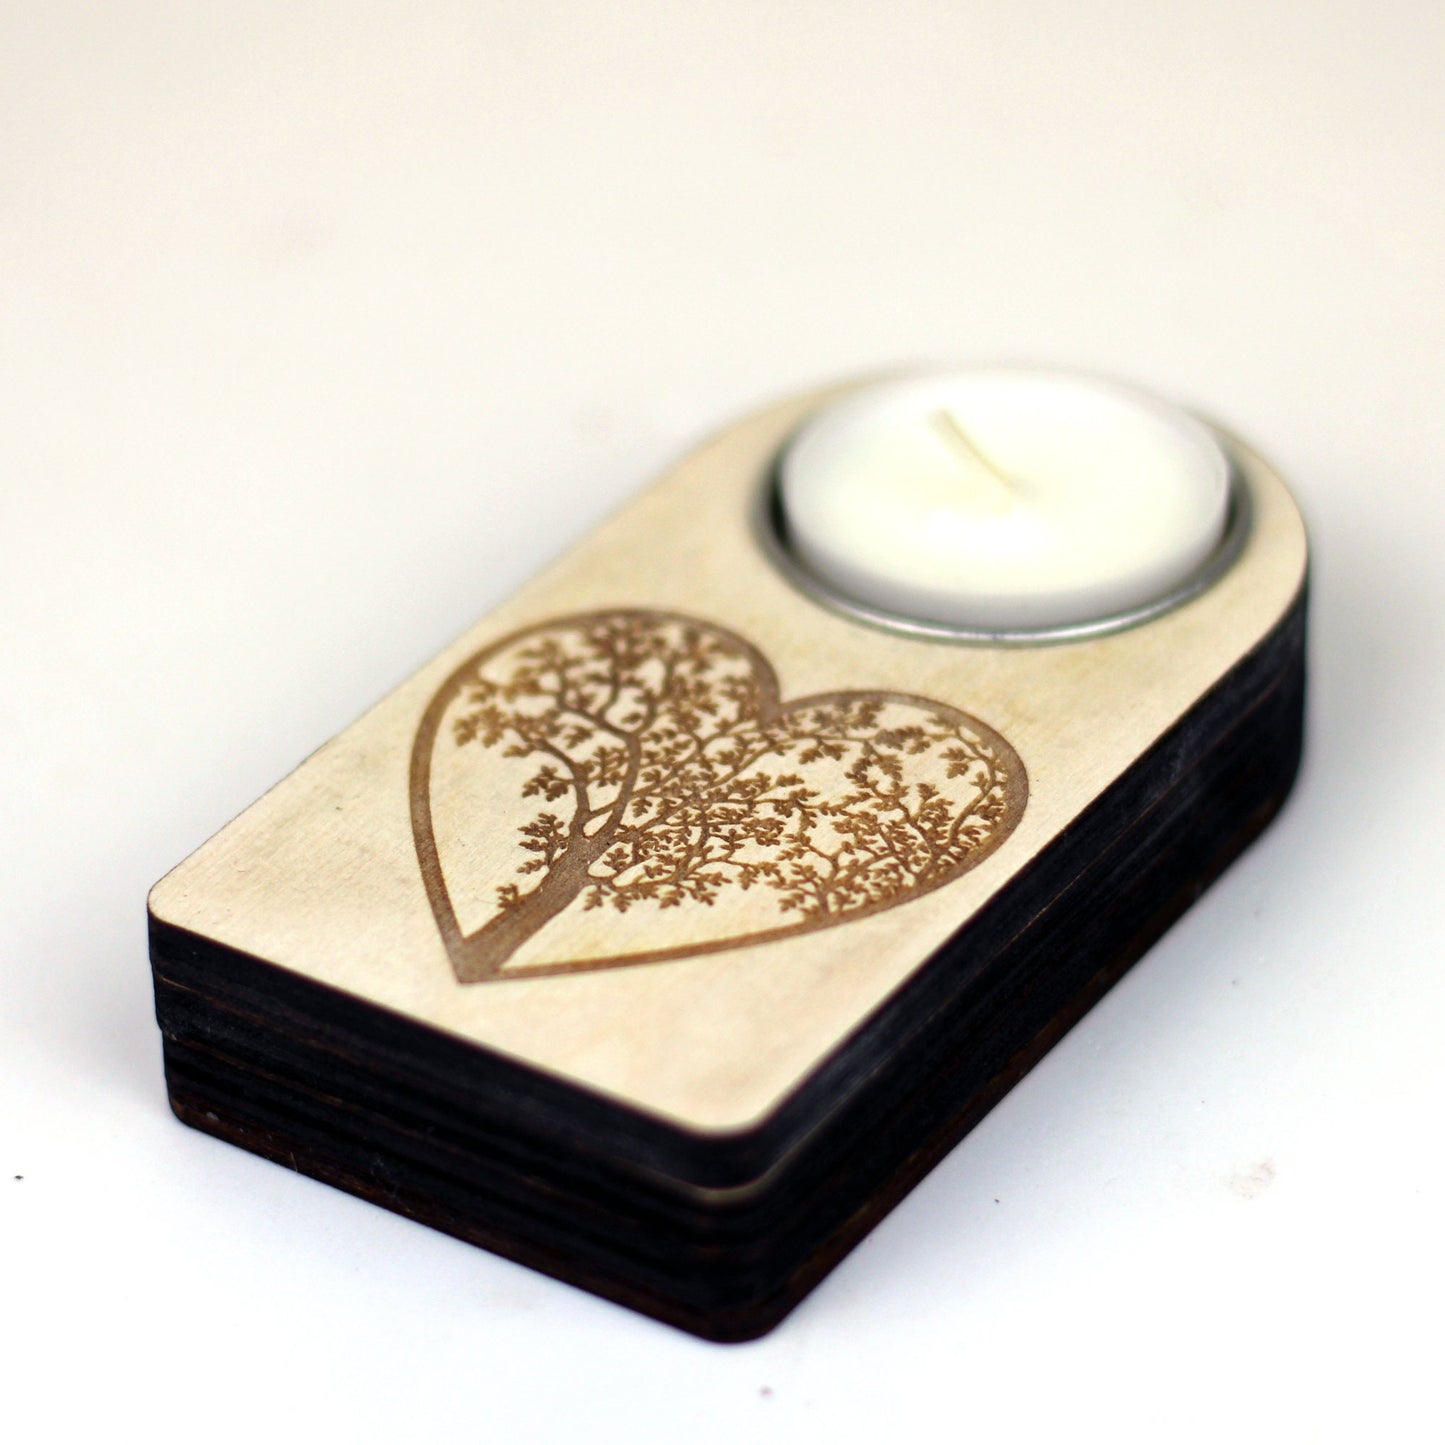 Engraved wooden candle holder with heart tree motif and secret compartment, it holds tea light candle or nightlight